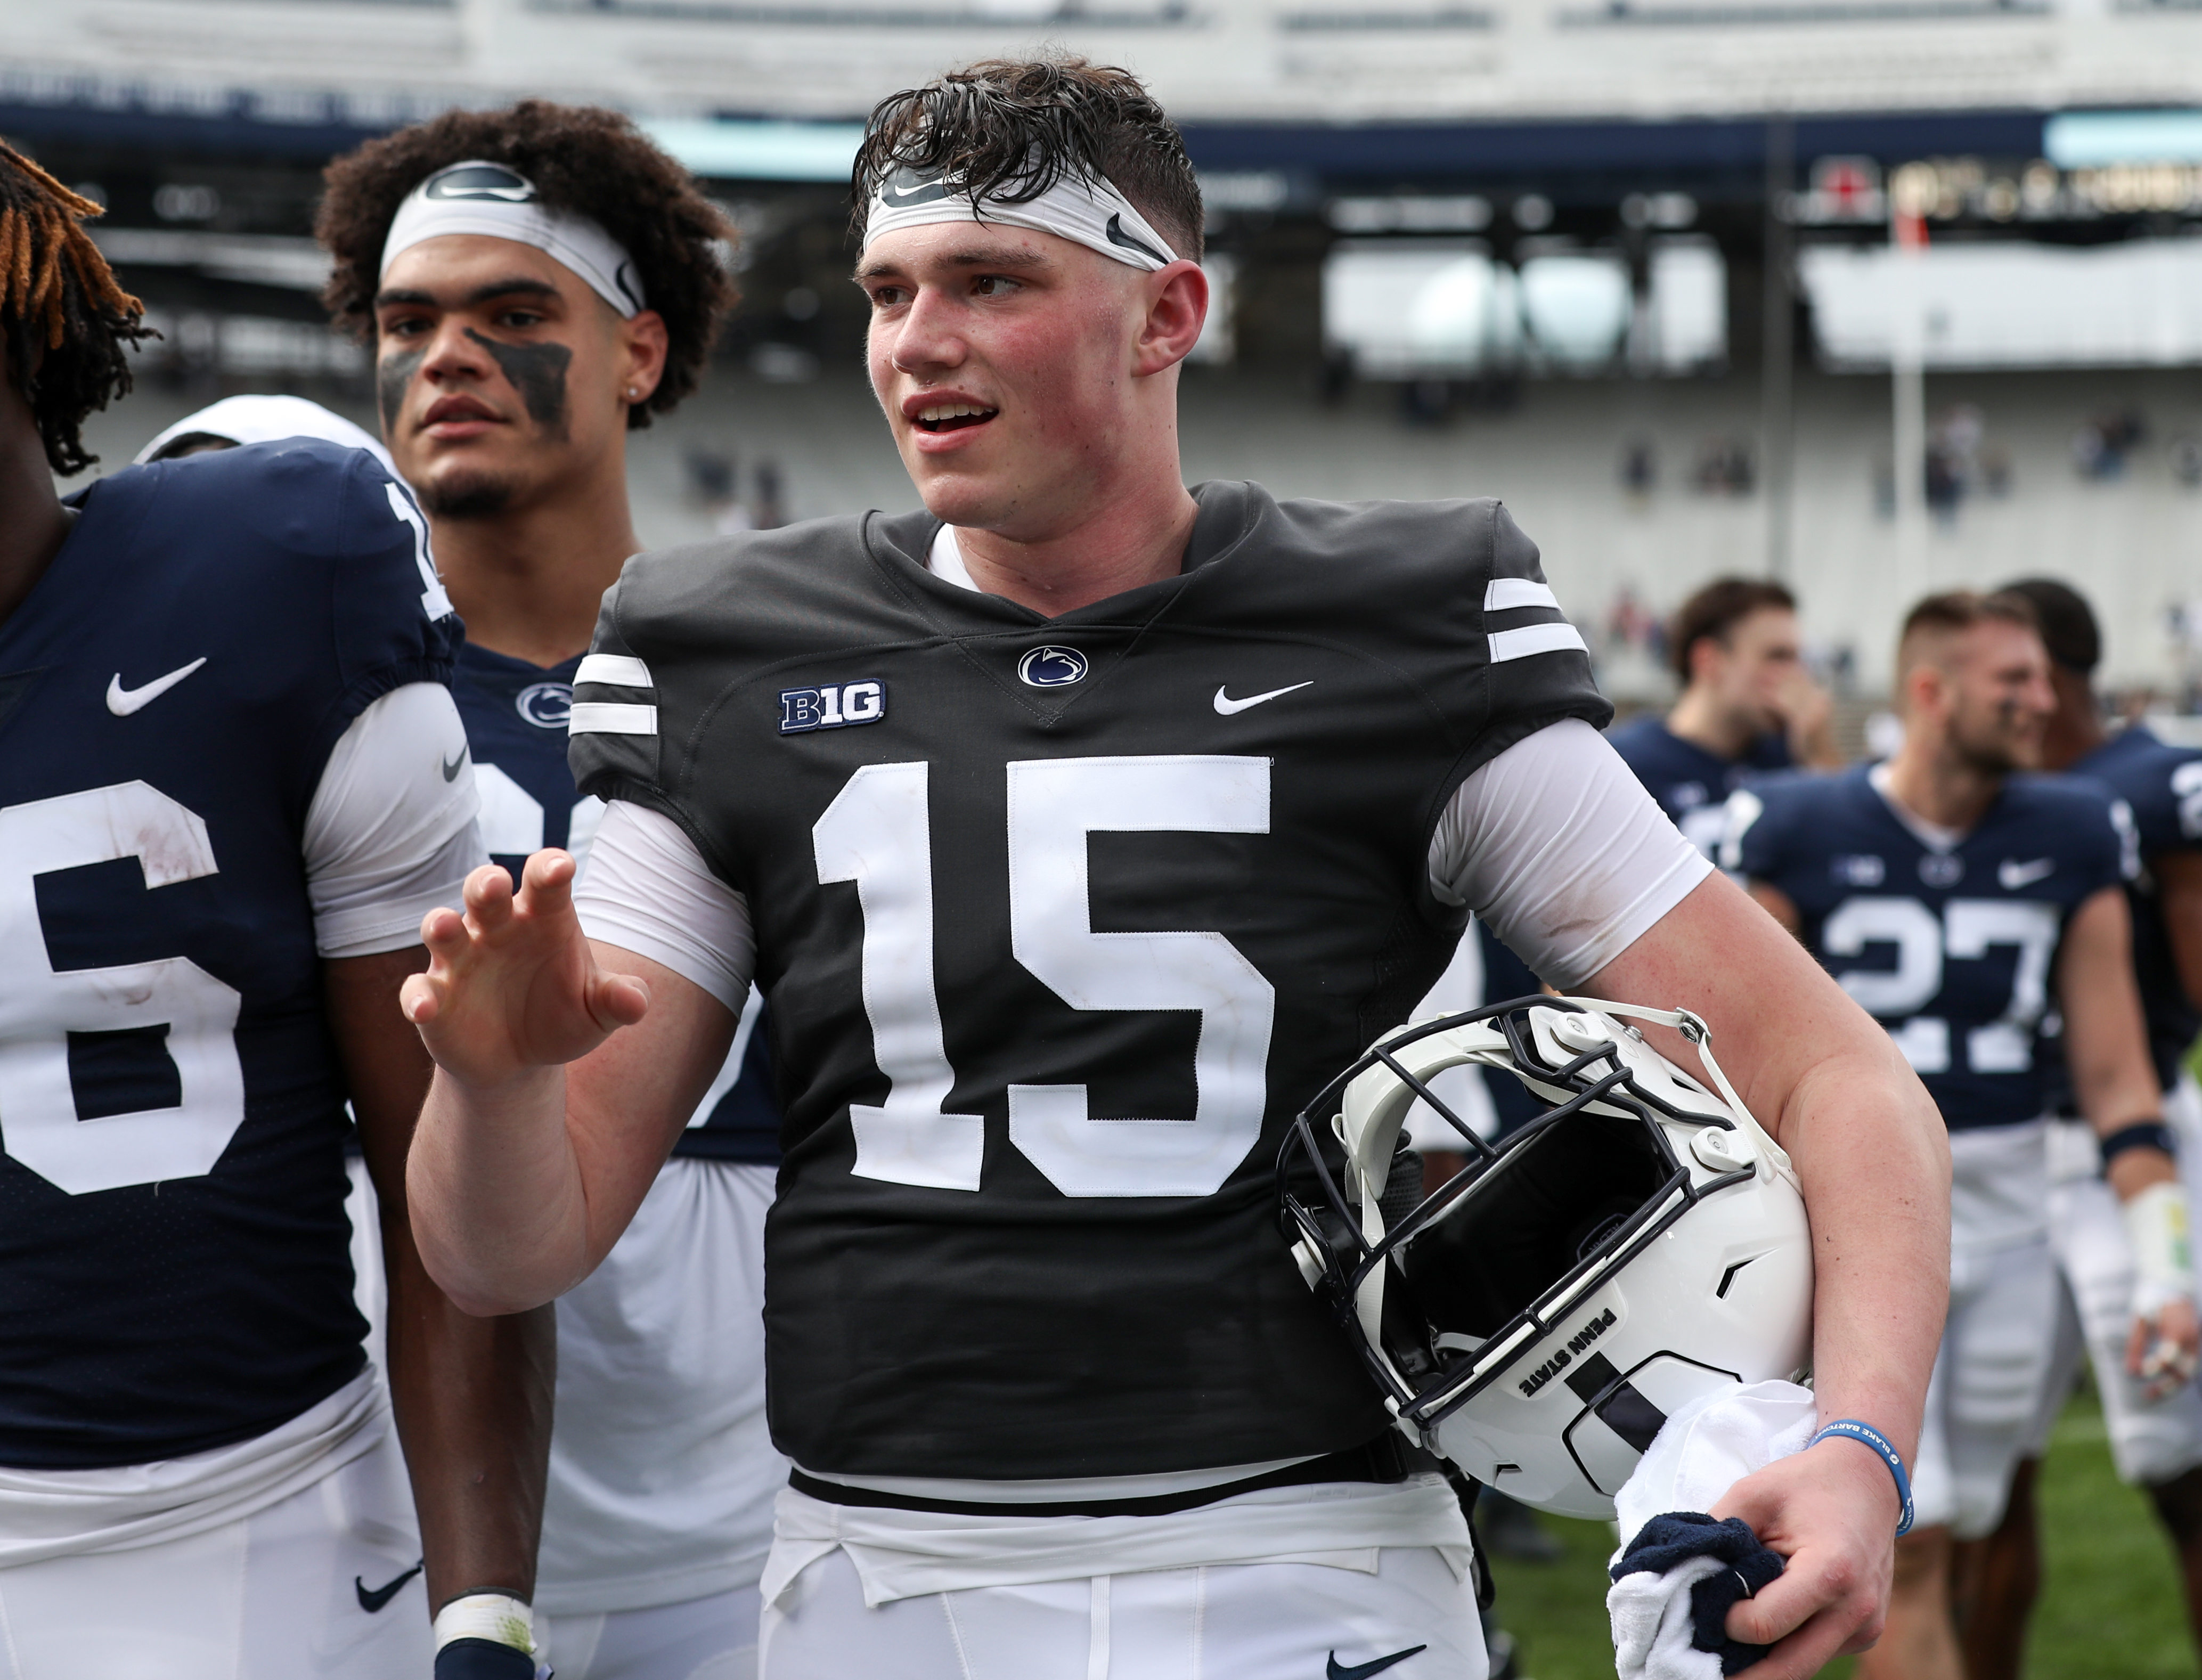 Penn State Nittany Lions quarterback Drew Allar (15) walks off the field following the competition of the Blue White spring game at Beaver Stadium.